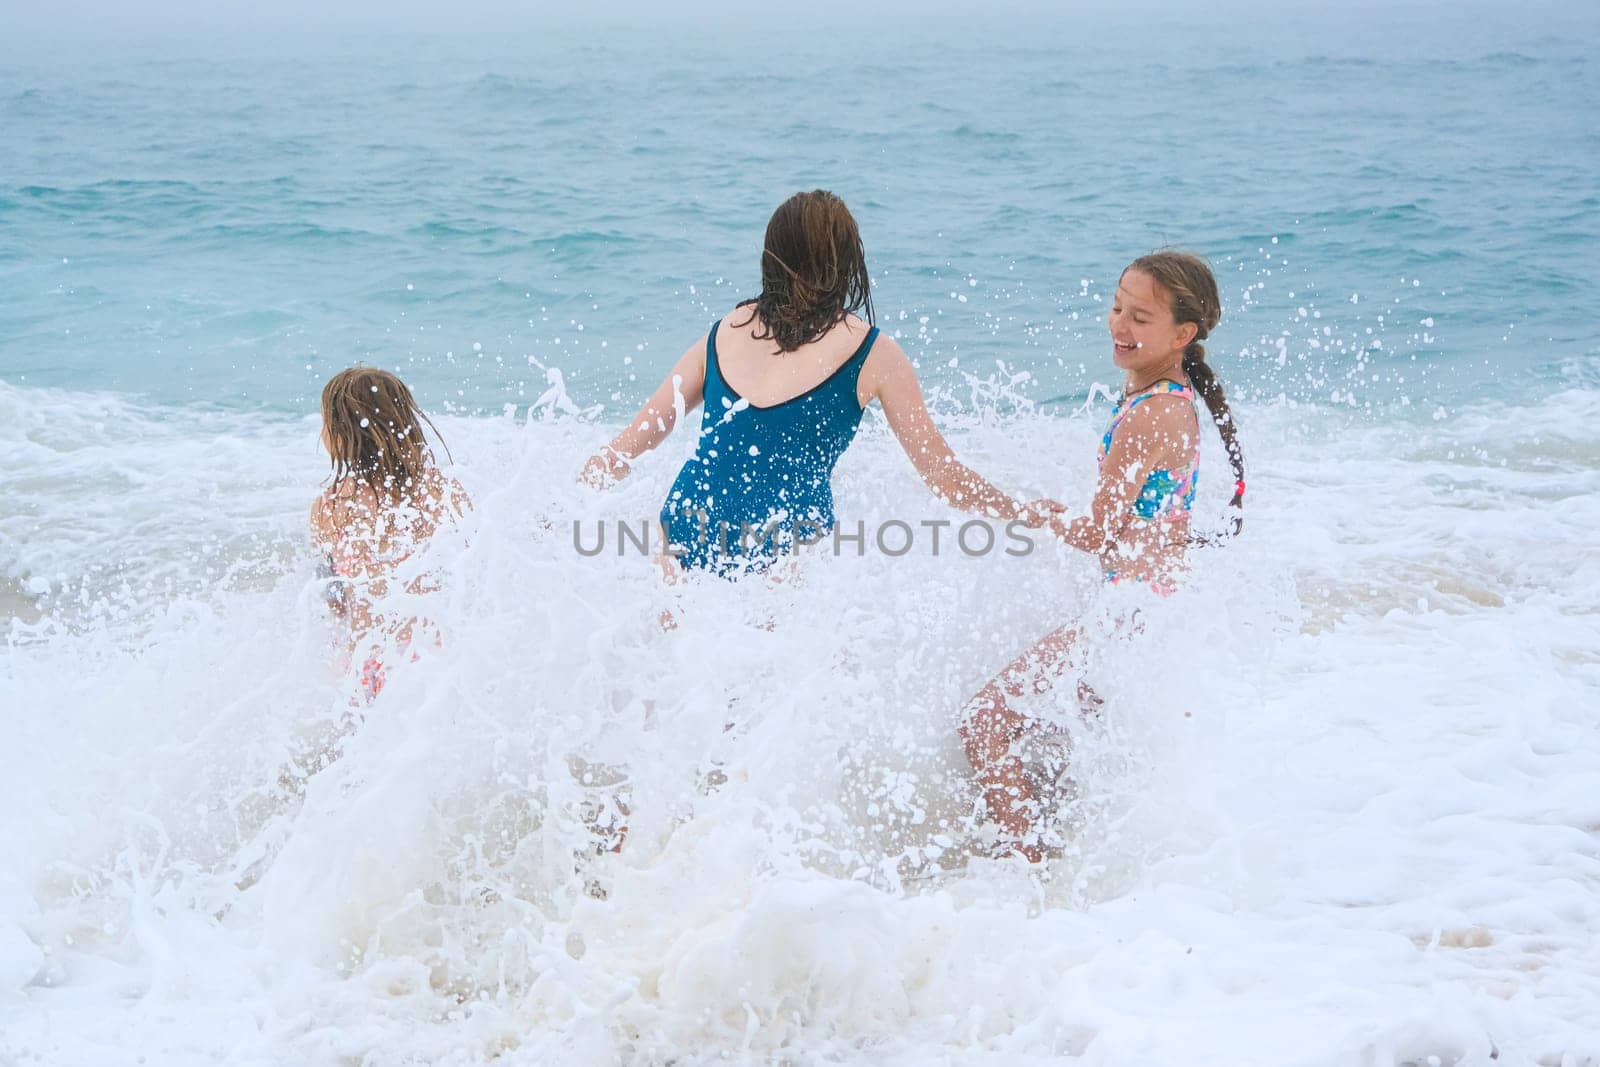 Mother and children playing on the ocean beach. Family enjoying the ocean. Mother holds girls's hands and they all look at the ocean together.